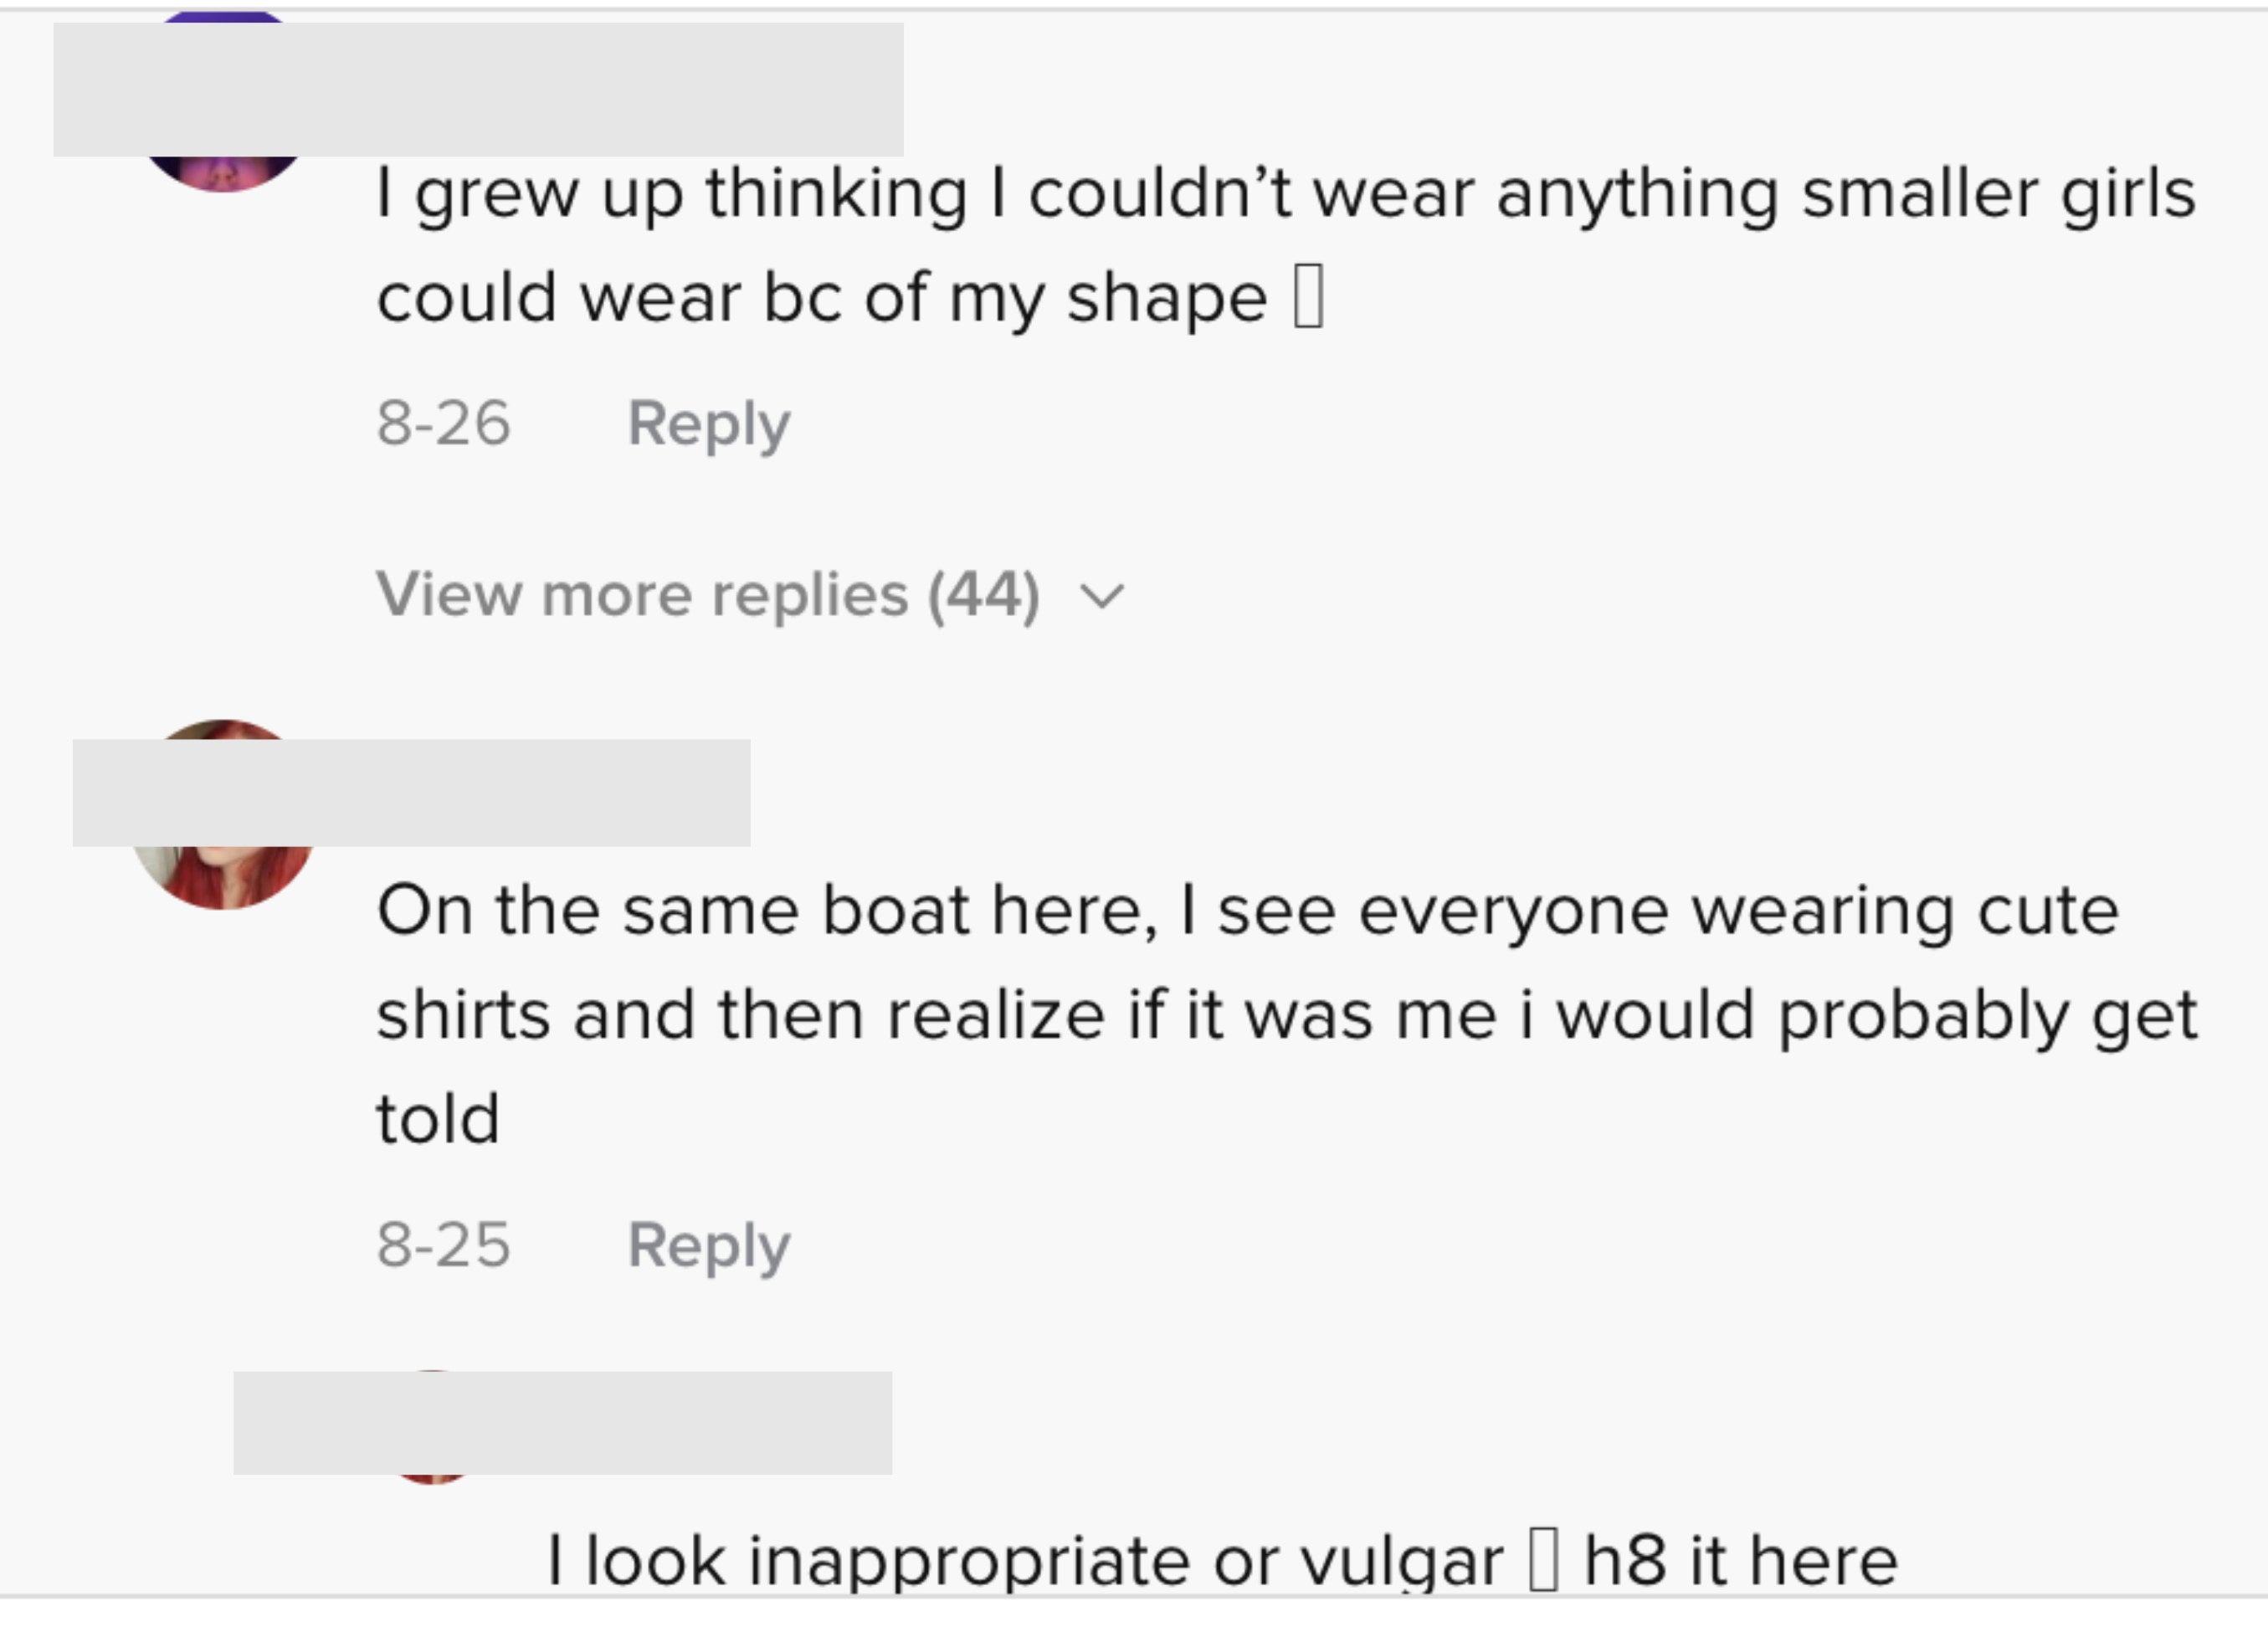 One person said, &#x27;I grew up thinking I couldn&#x27;t wear anything smaller girls could wear because of my shape&#x27;